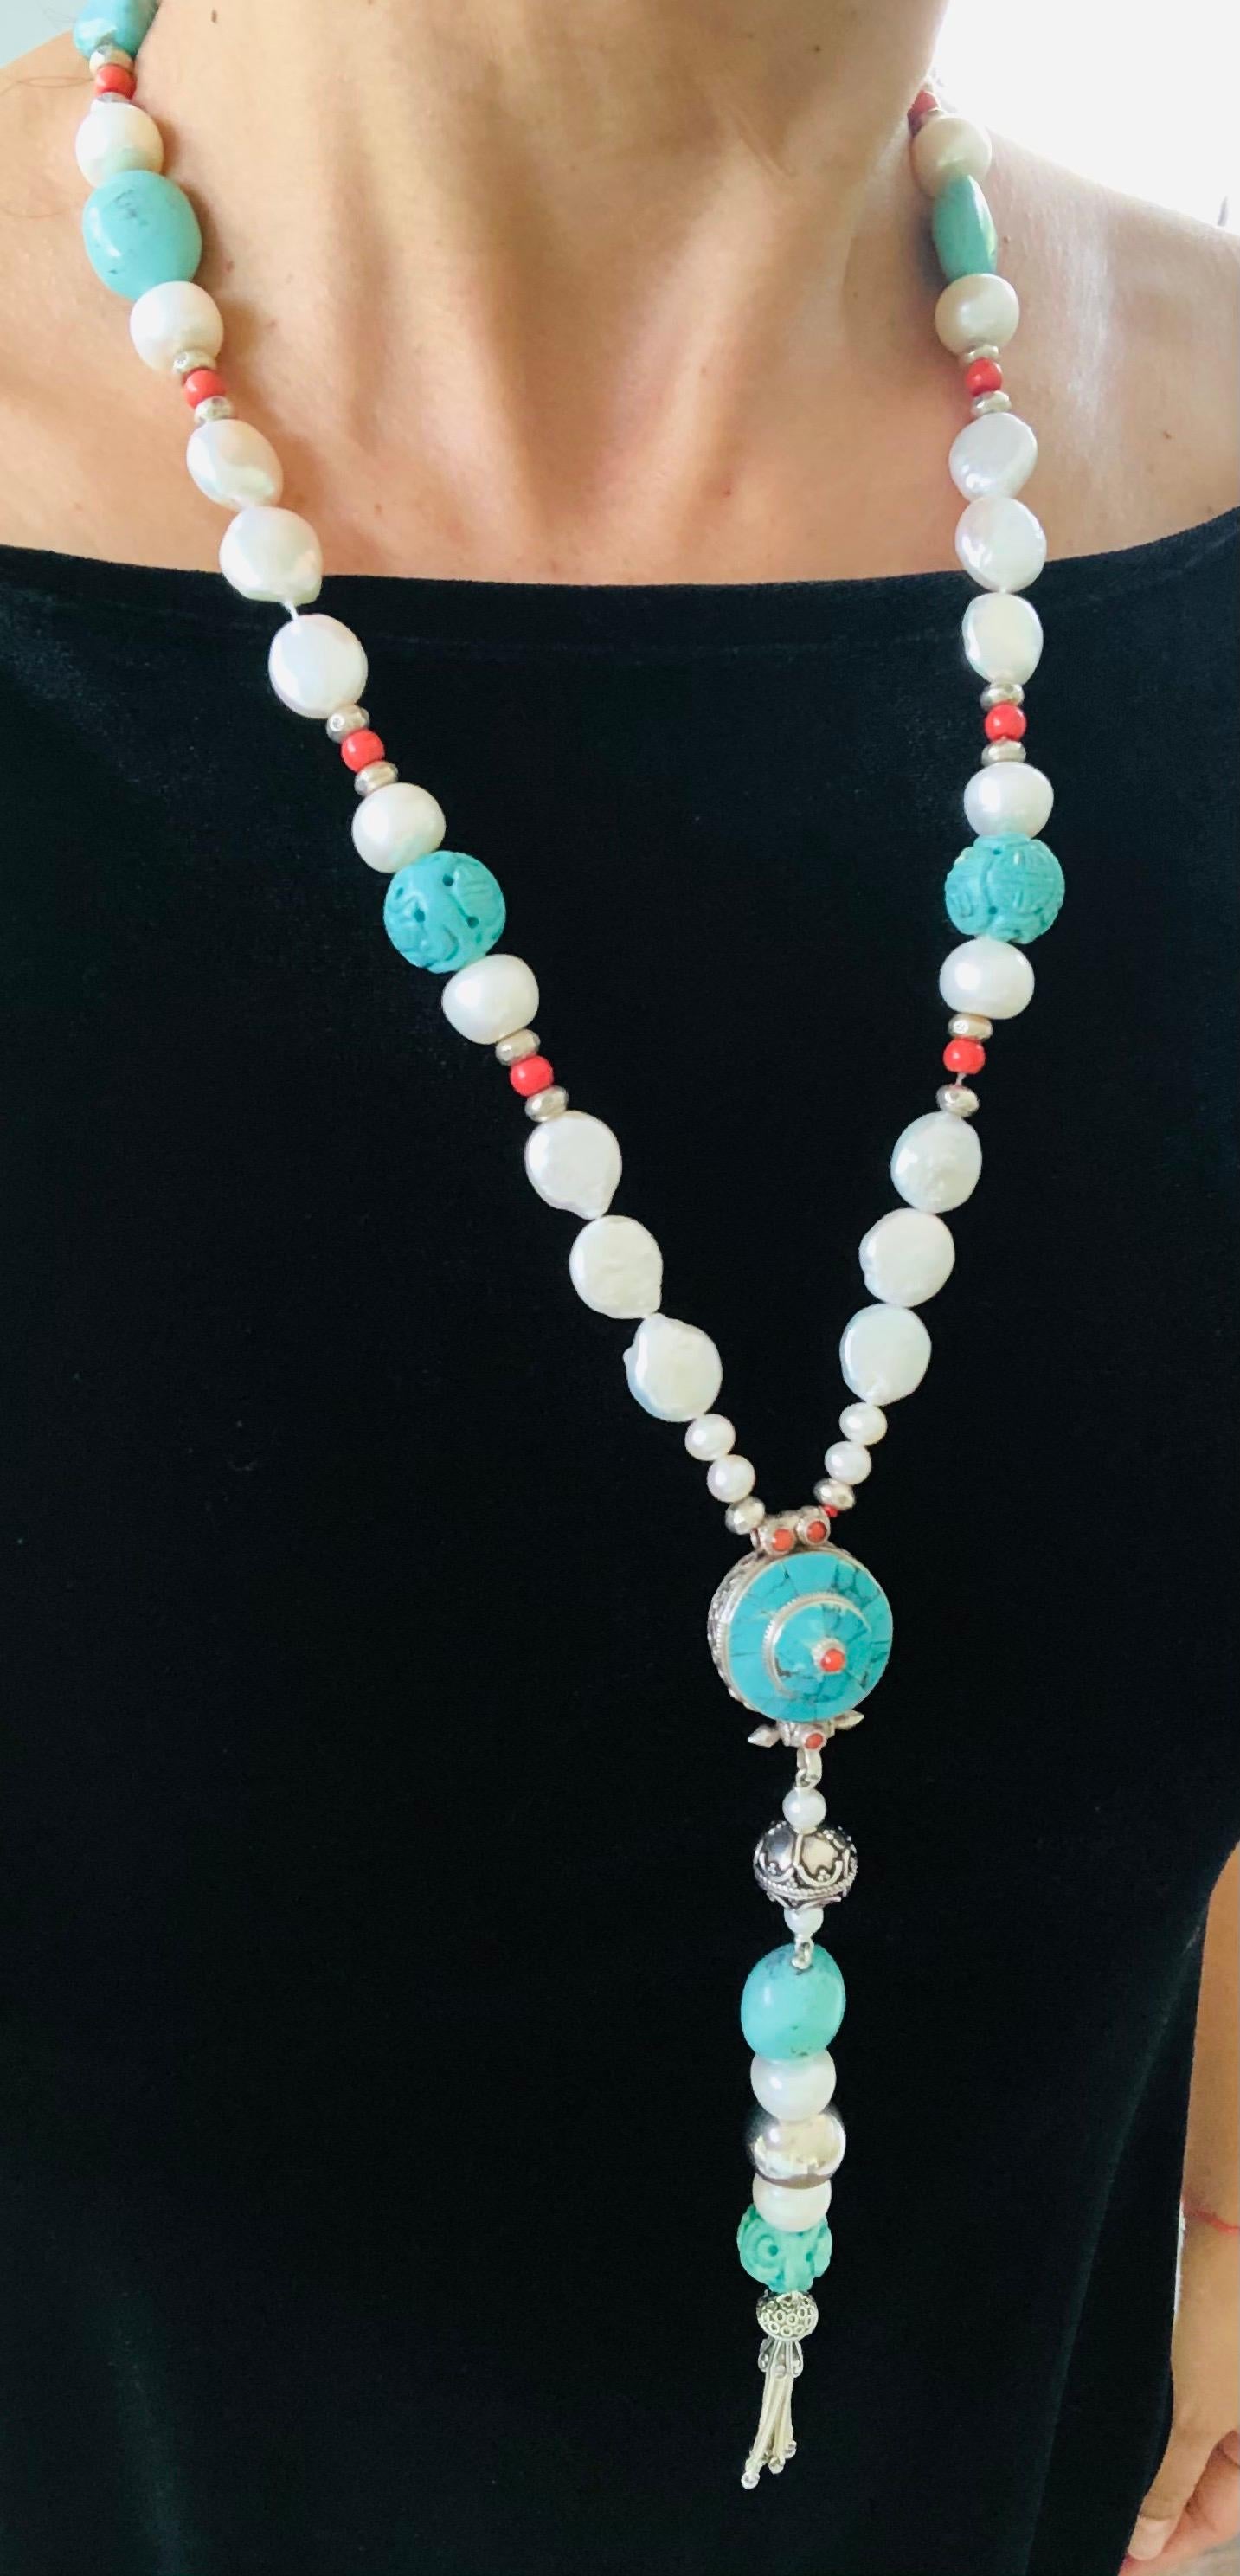 One-of-a-Kind
An unusual assortment of interesting elements centered by an authentic Ghau Box handcrafted in a Tibetan monastery inlaid with Turquoise and silver filigree, Chinese carved turquoise, polished American turquoise, freshwater coin